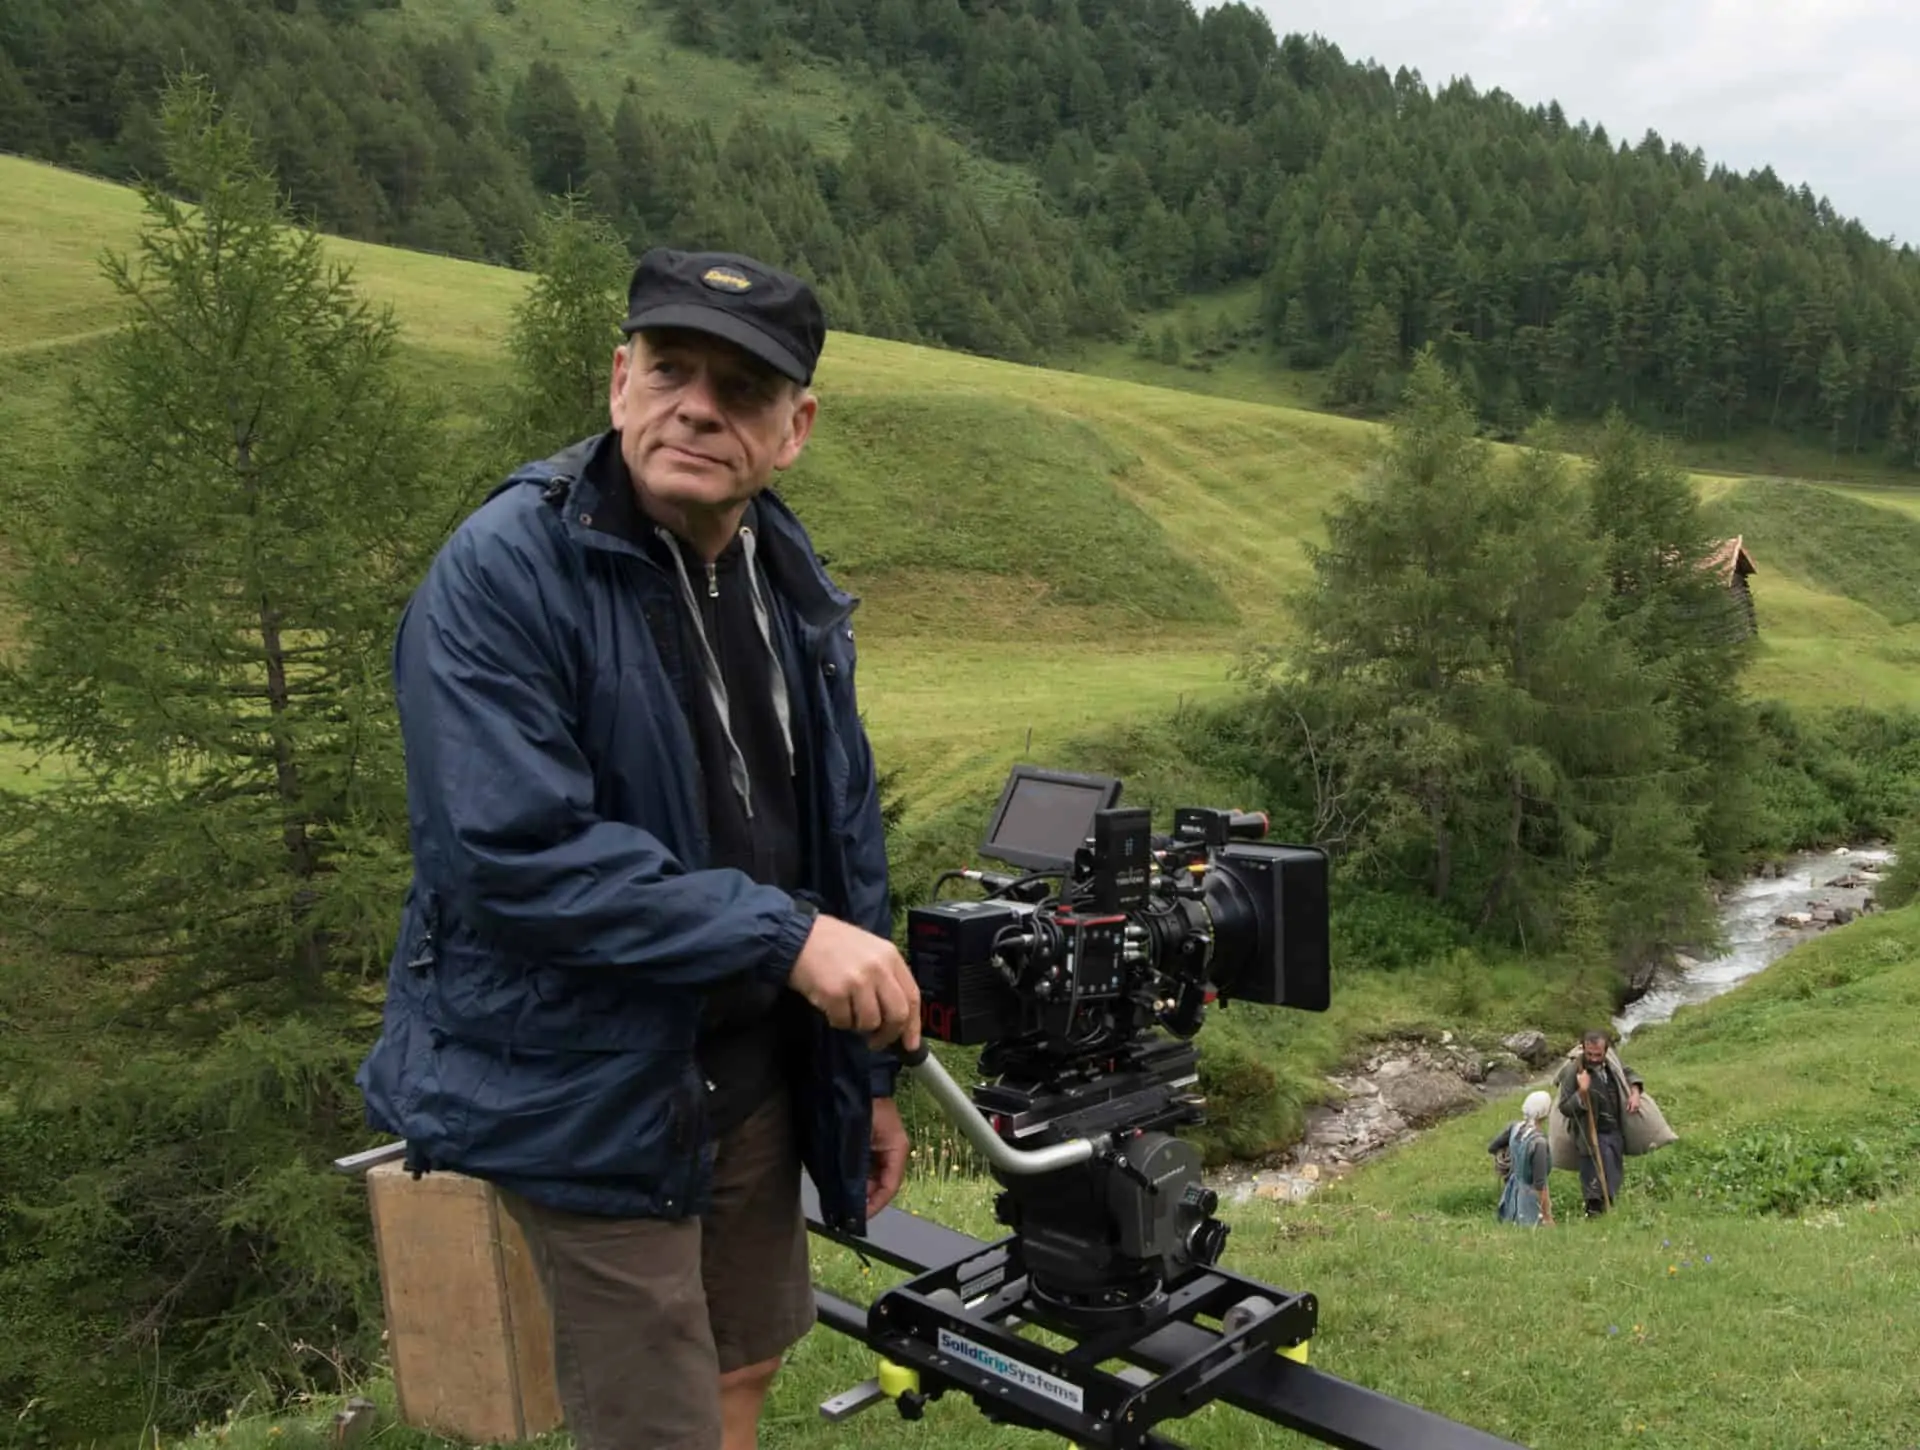 Director of Photography Joerg Widmer on the set of A HIDDEN LIFE. Photo by Reiner Bajo. © 2019 Twentieth Century Fox Film Corporation All Rights Reserved